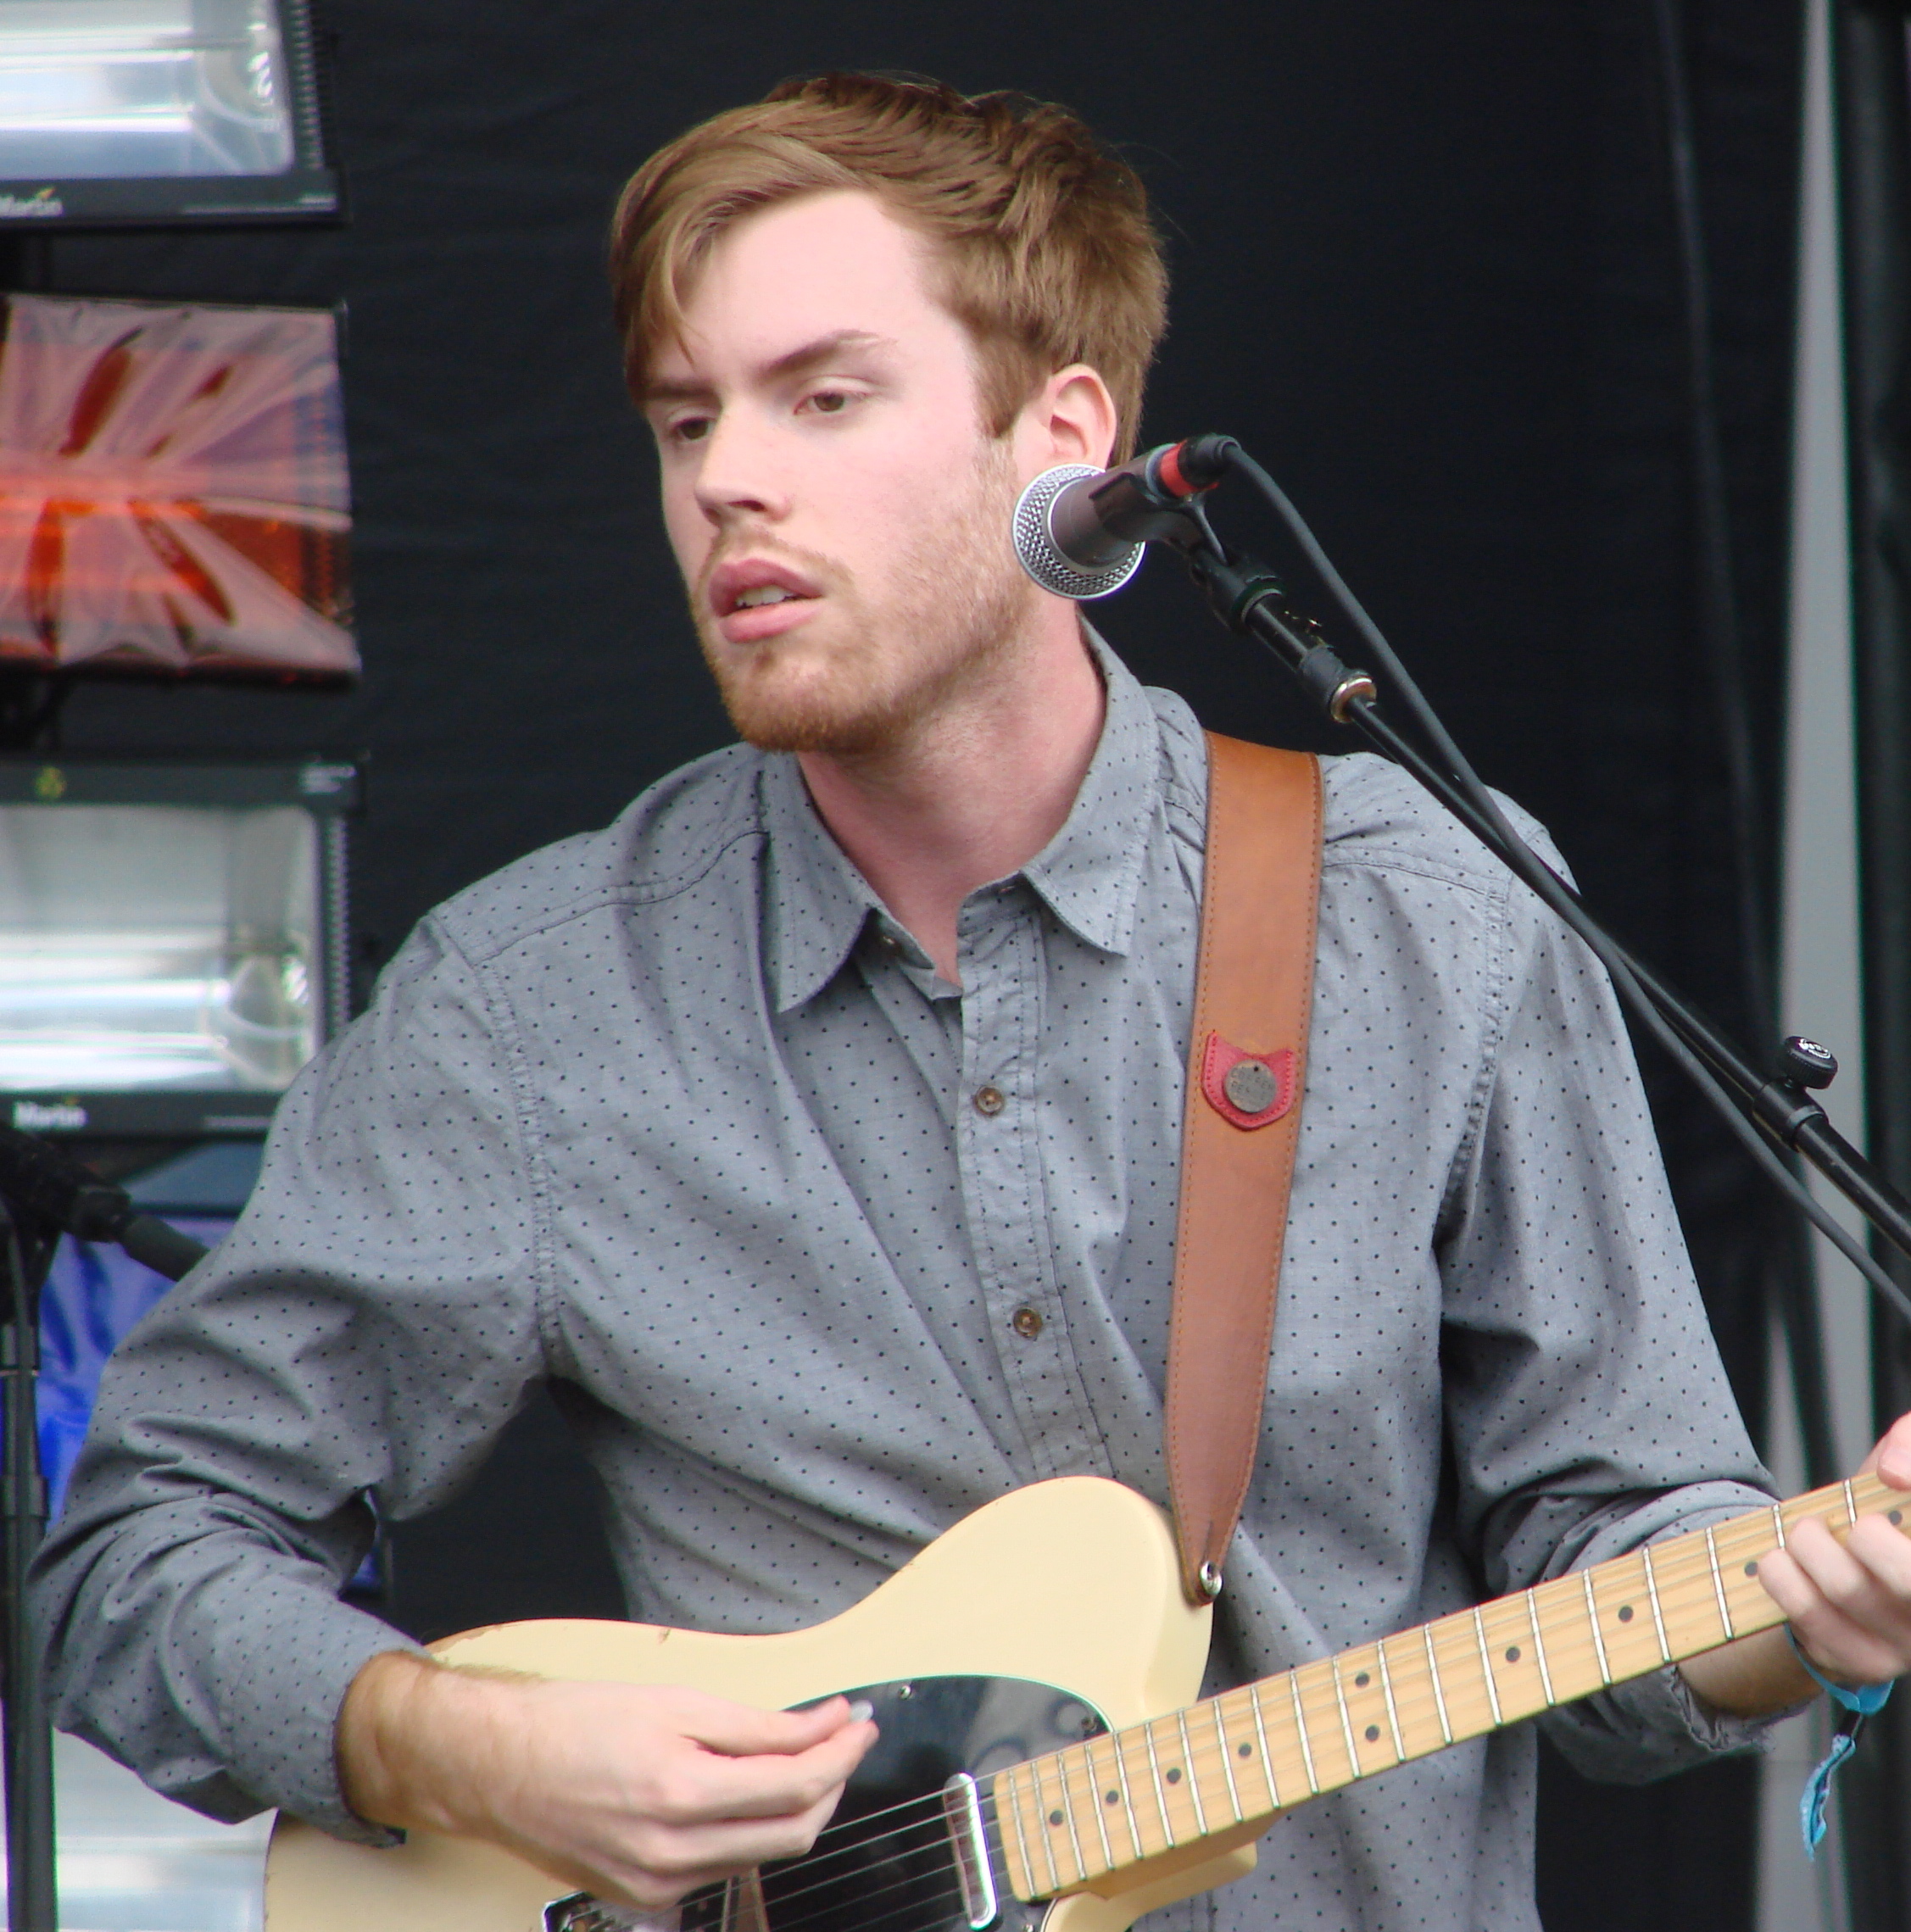 Wild Nothing reveals new tour dates with Small Black, shares performance from Carson Daly.